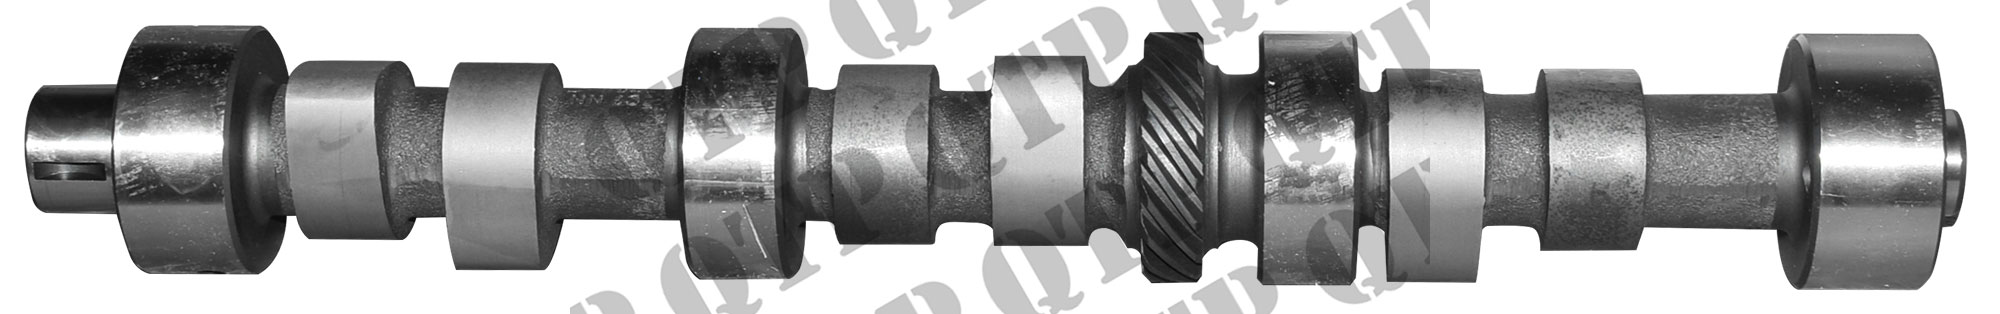 Camshaft Ford 00 10 30 Series